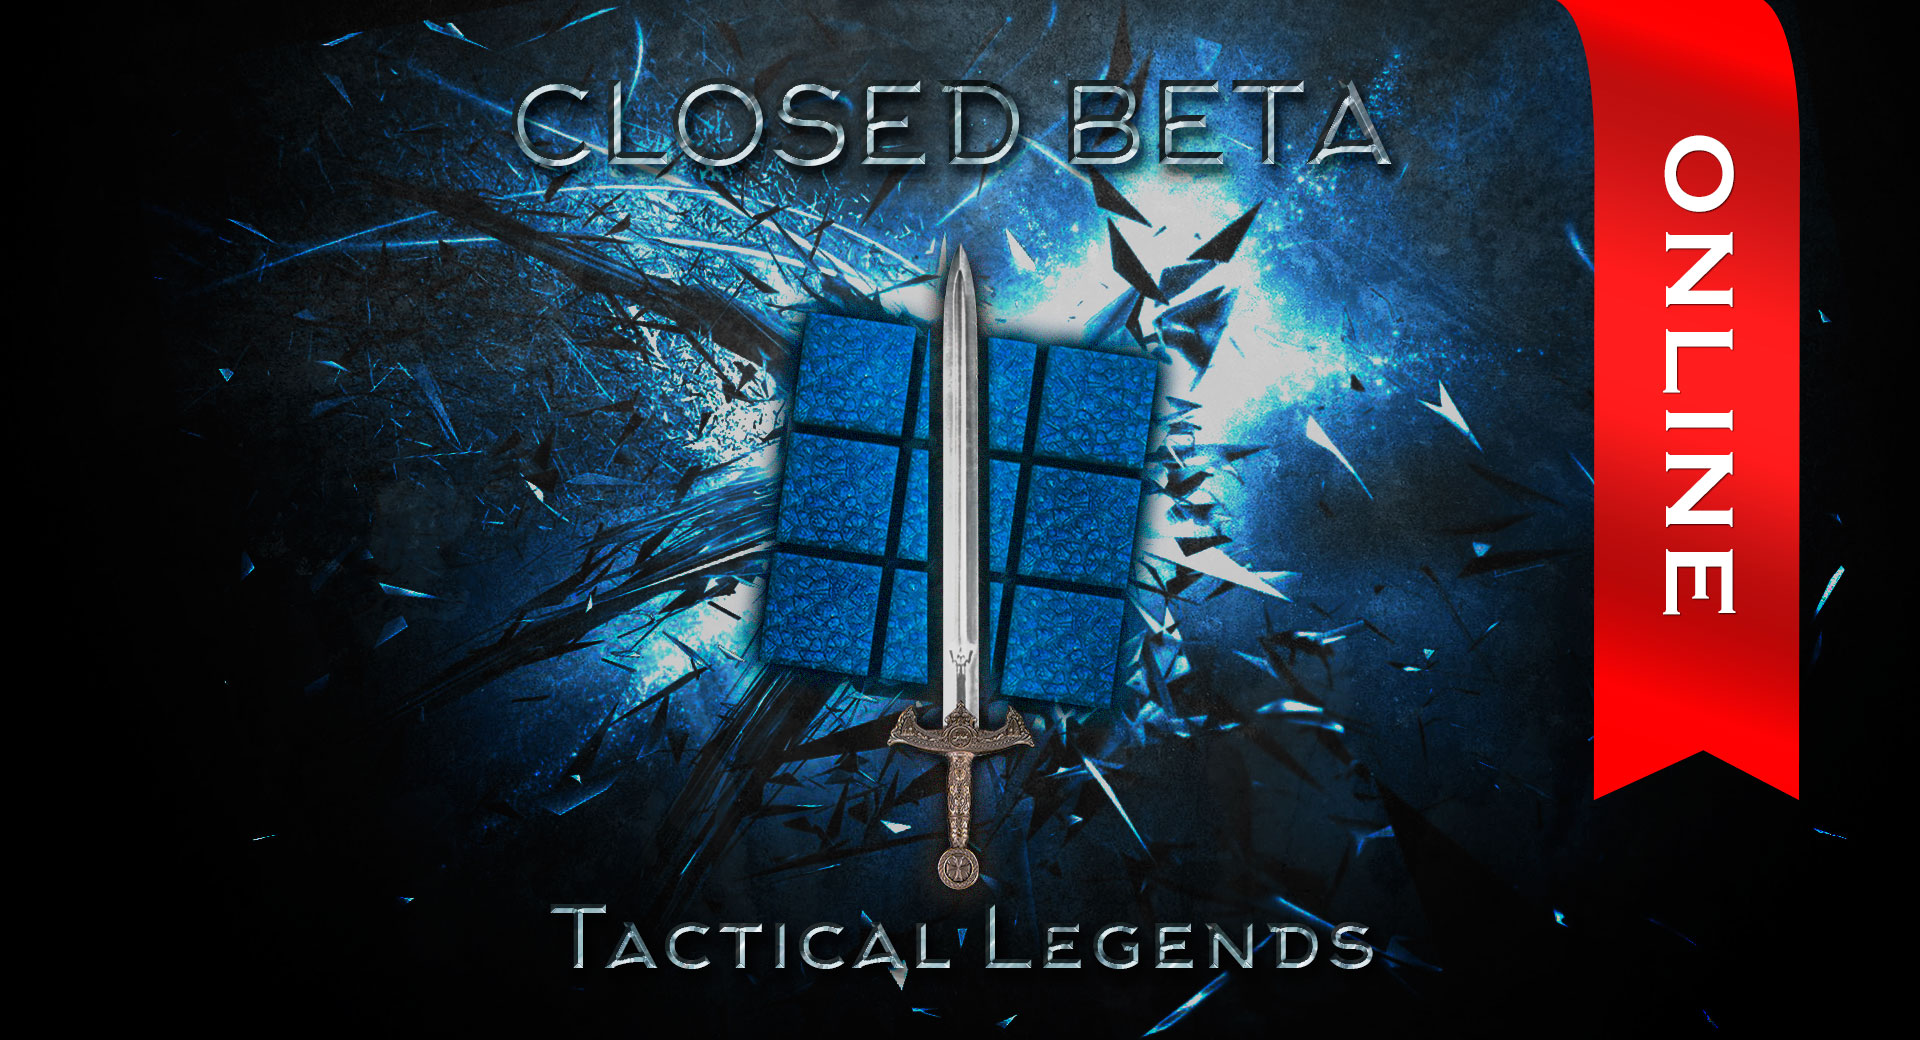 THE ANNOUNCEMENT OF CLOSED BETA